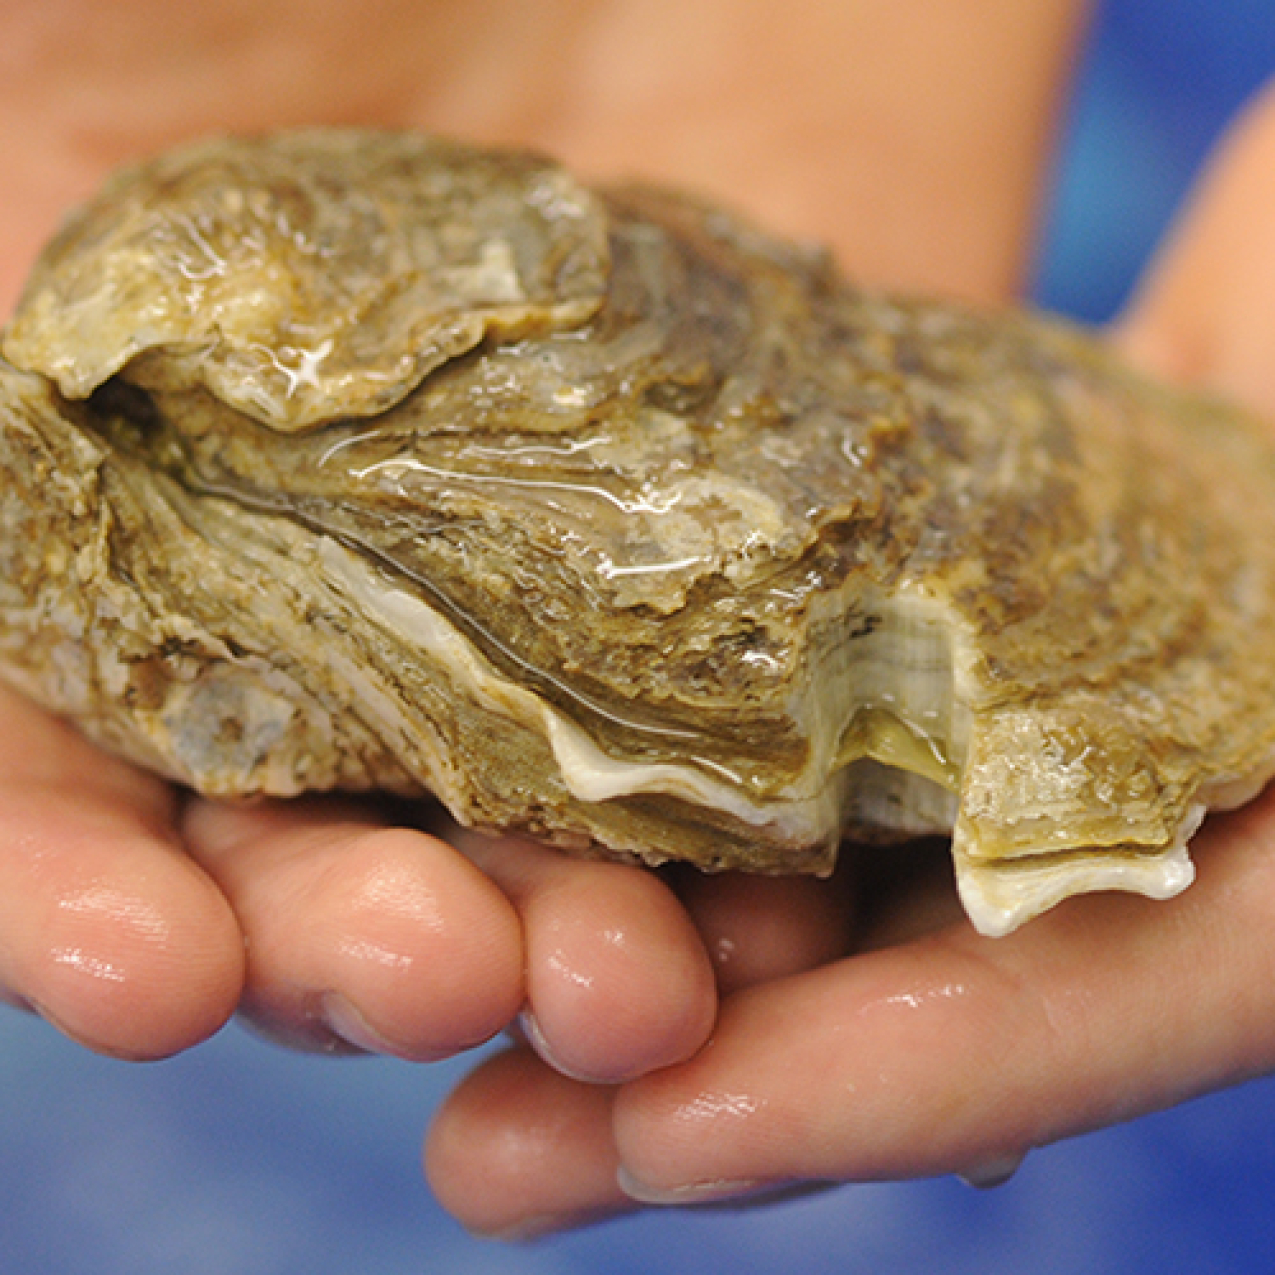 Lady's Island Oysters provides seed to local oyster growers. The final products are large, single oysters, which don't compete with the wild harvested cluster oysters in the area.